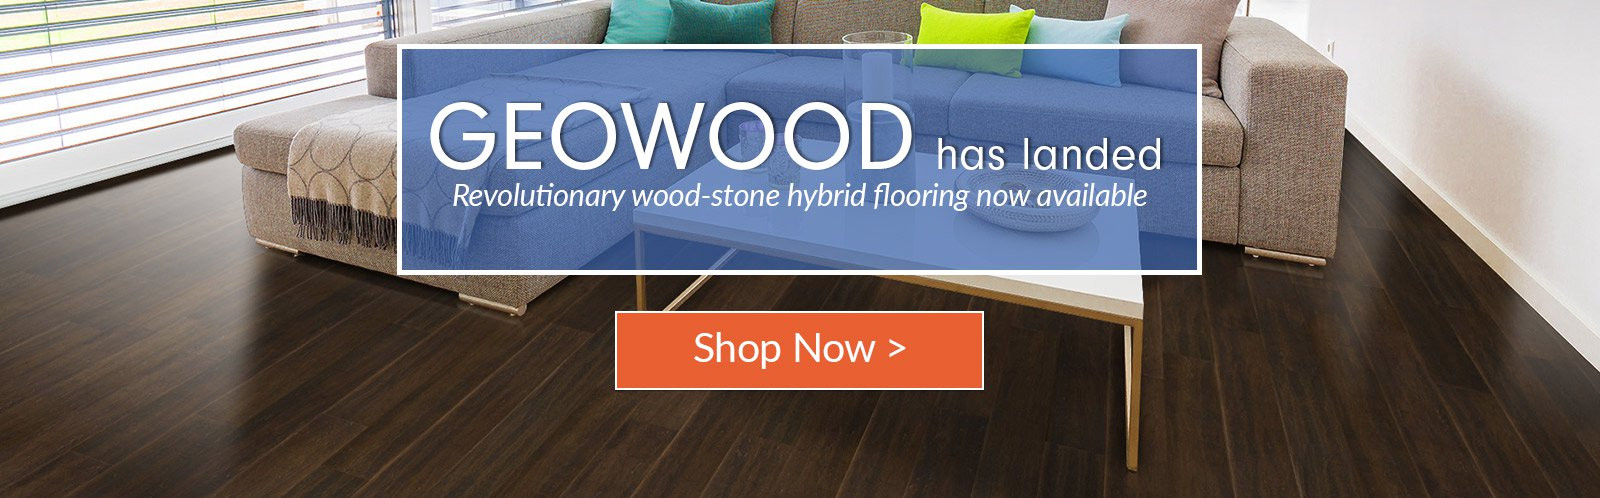 27 Elegant Engineered Hardwood Floor Scratch Repair Kit 2022 free download engineered hardwood floor scratch repair kit of green building construction materials and home decor cali bamboo within geowood launch homepage slider